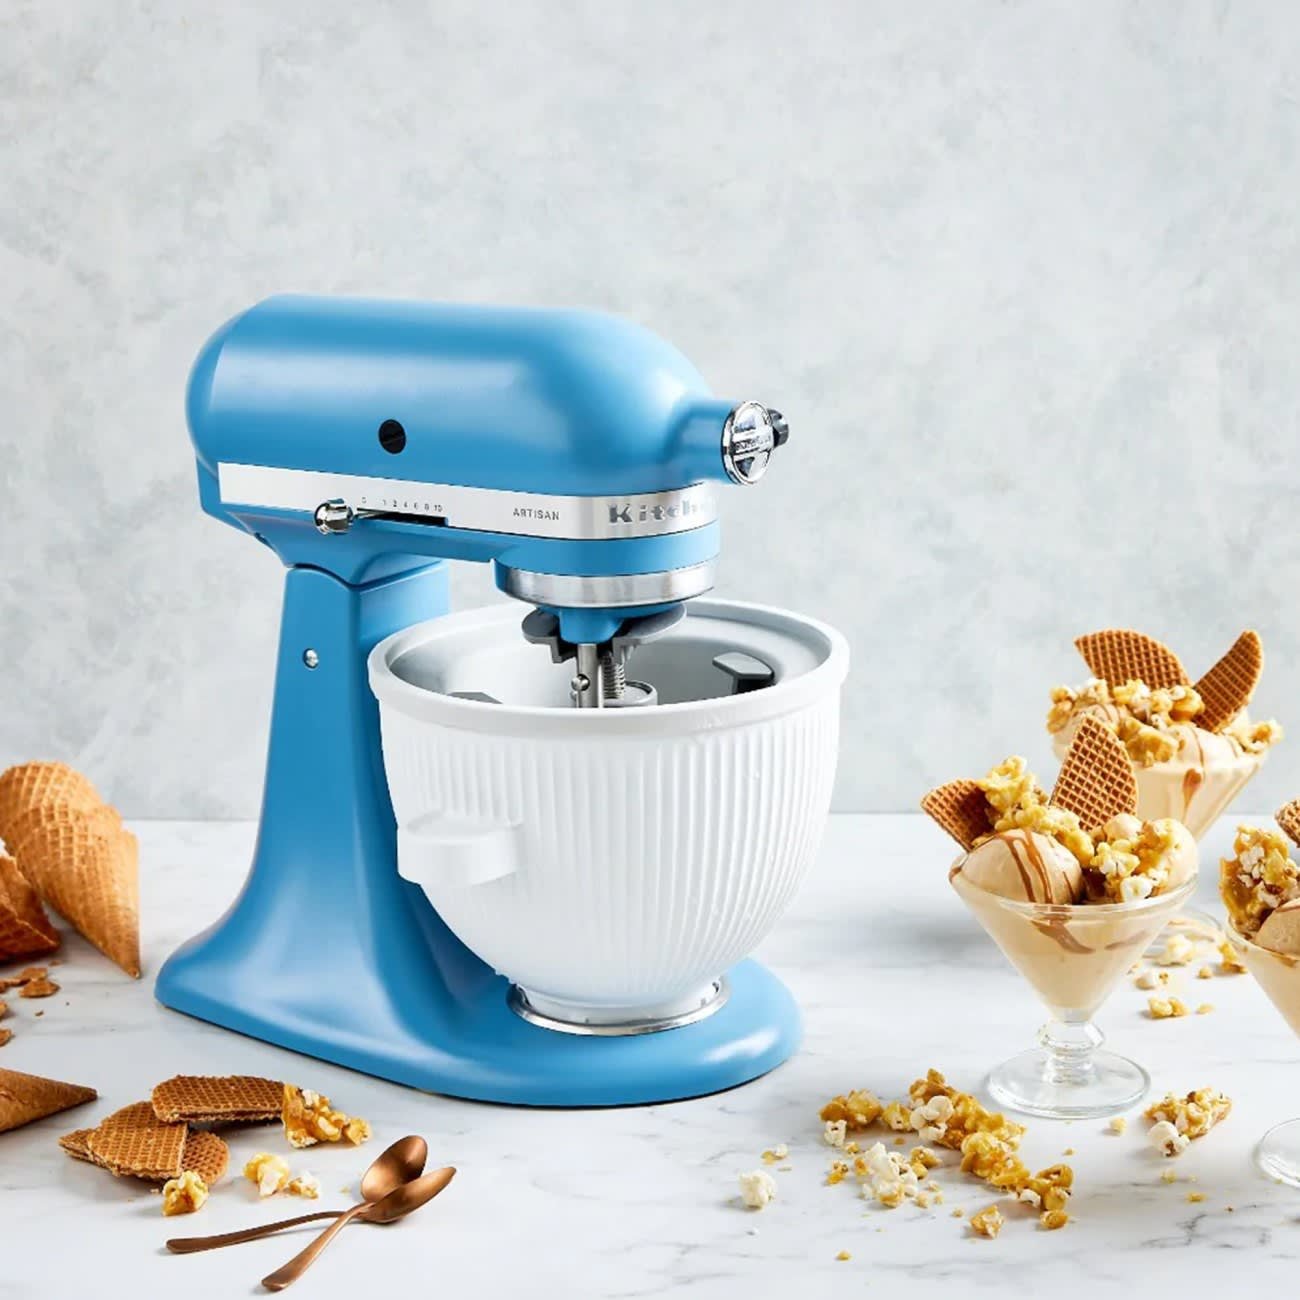 Artisan Stand Mixer in Blue Velvet  Brighten up your Blue Monday and  kitchen with the all new Artisan Stand Mixer in Blue Velvet. Just in time  for the Festive Season. What